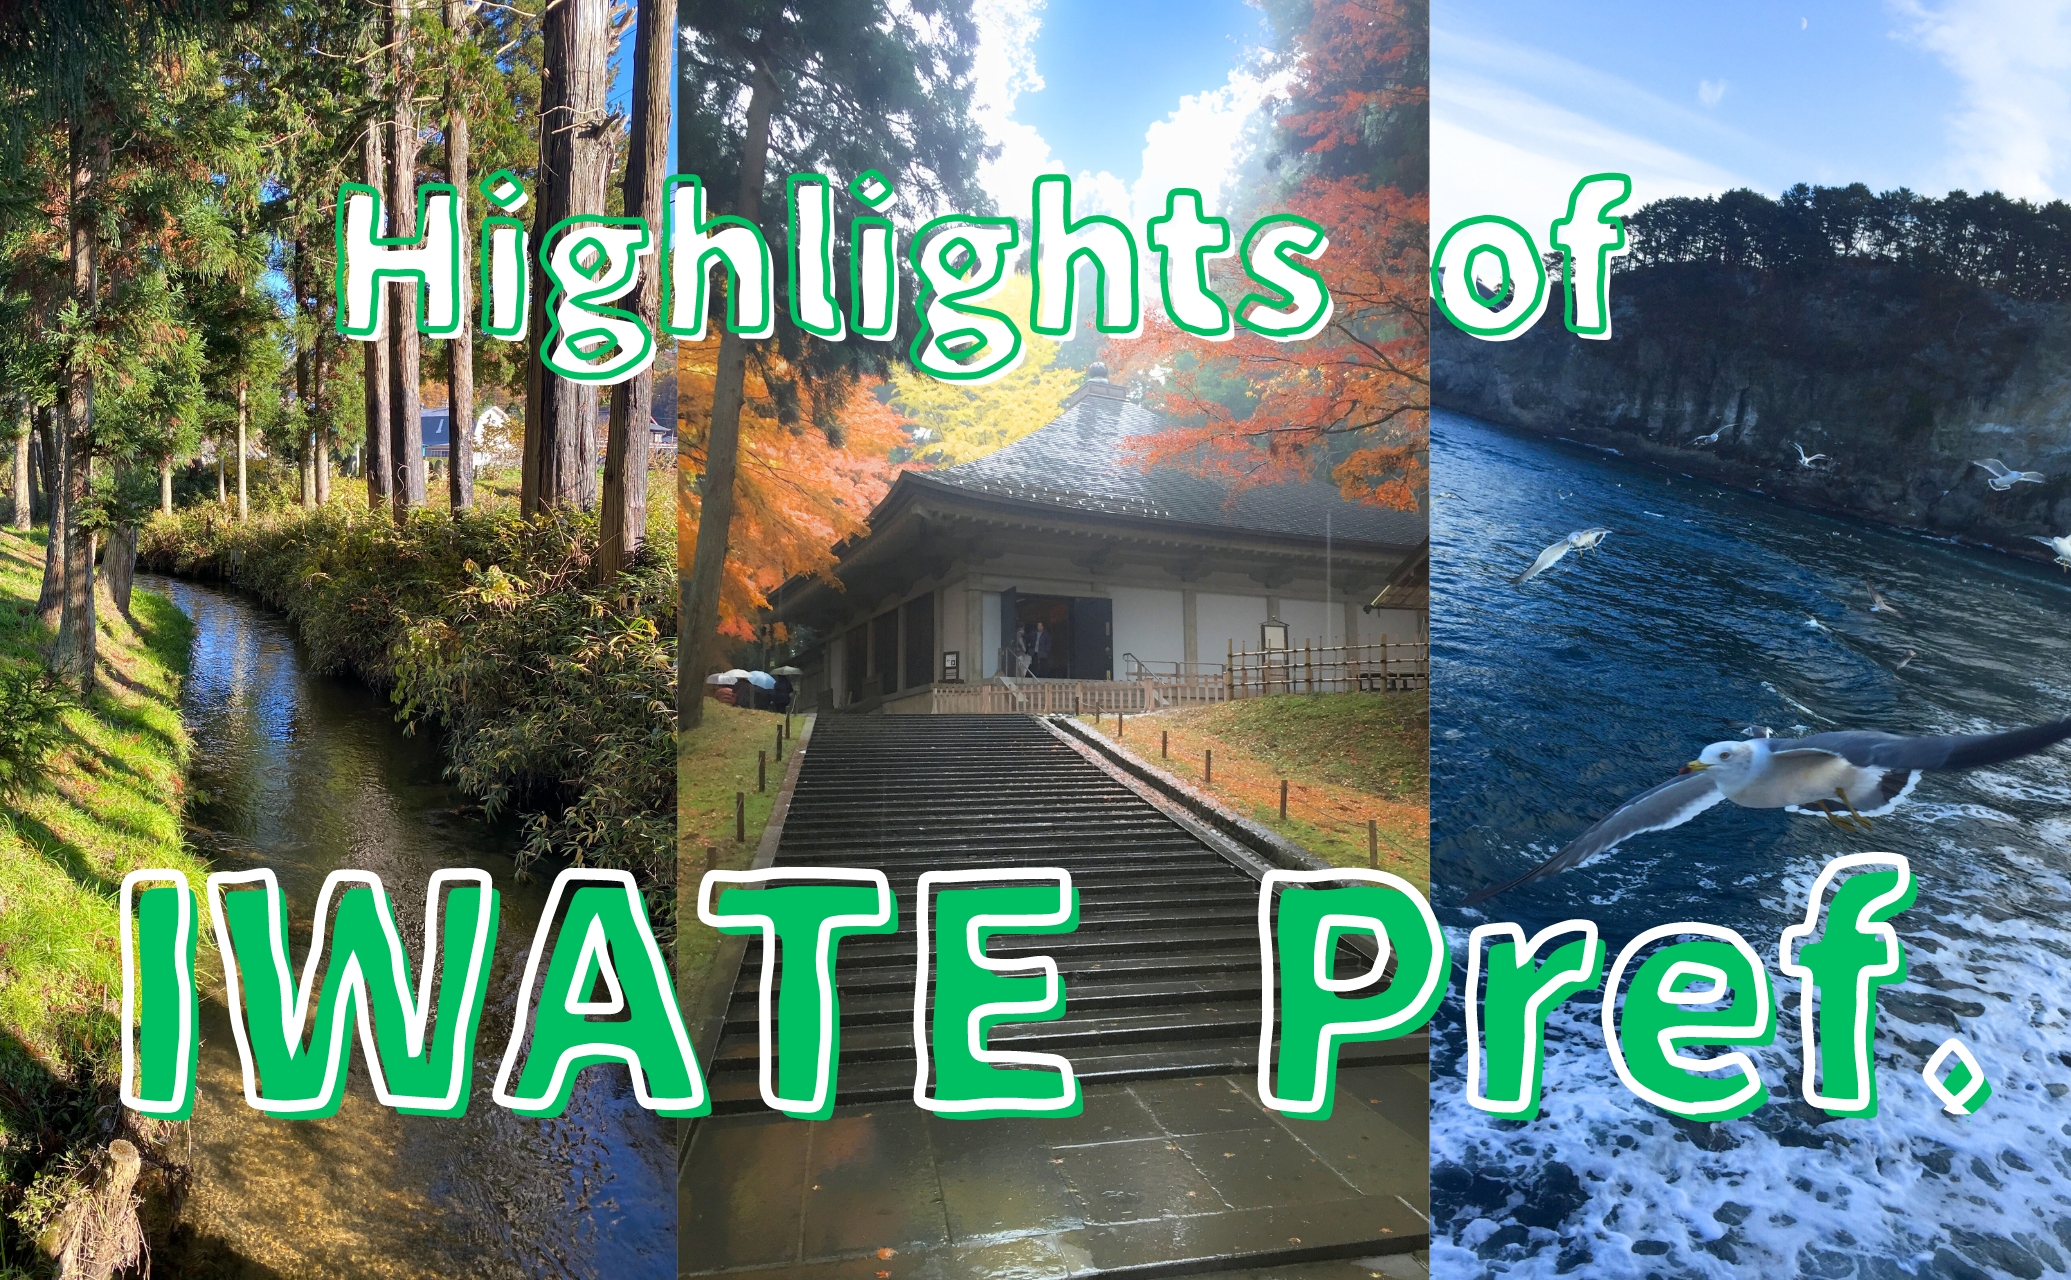 Highlights of Iwate Prefecture